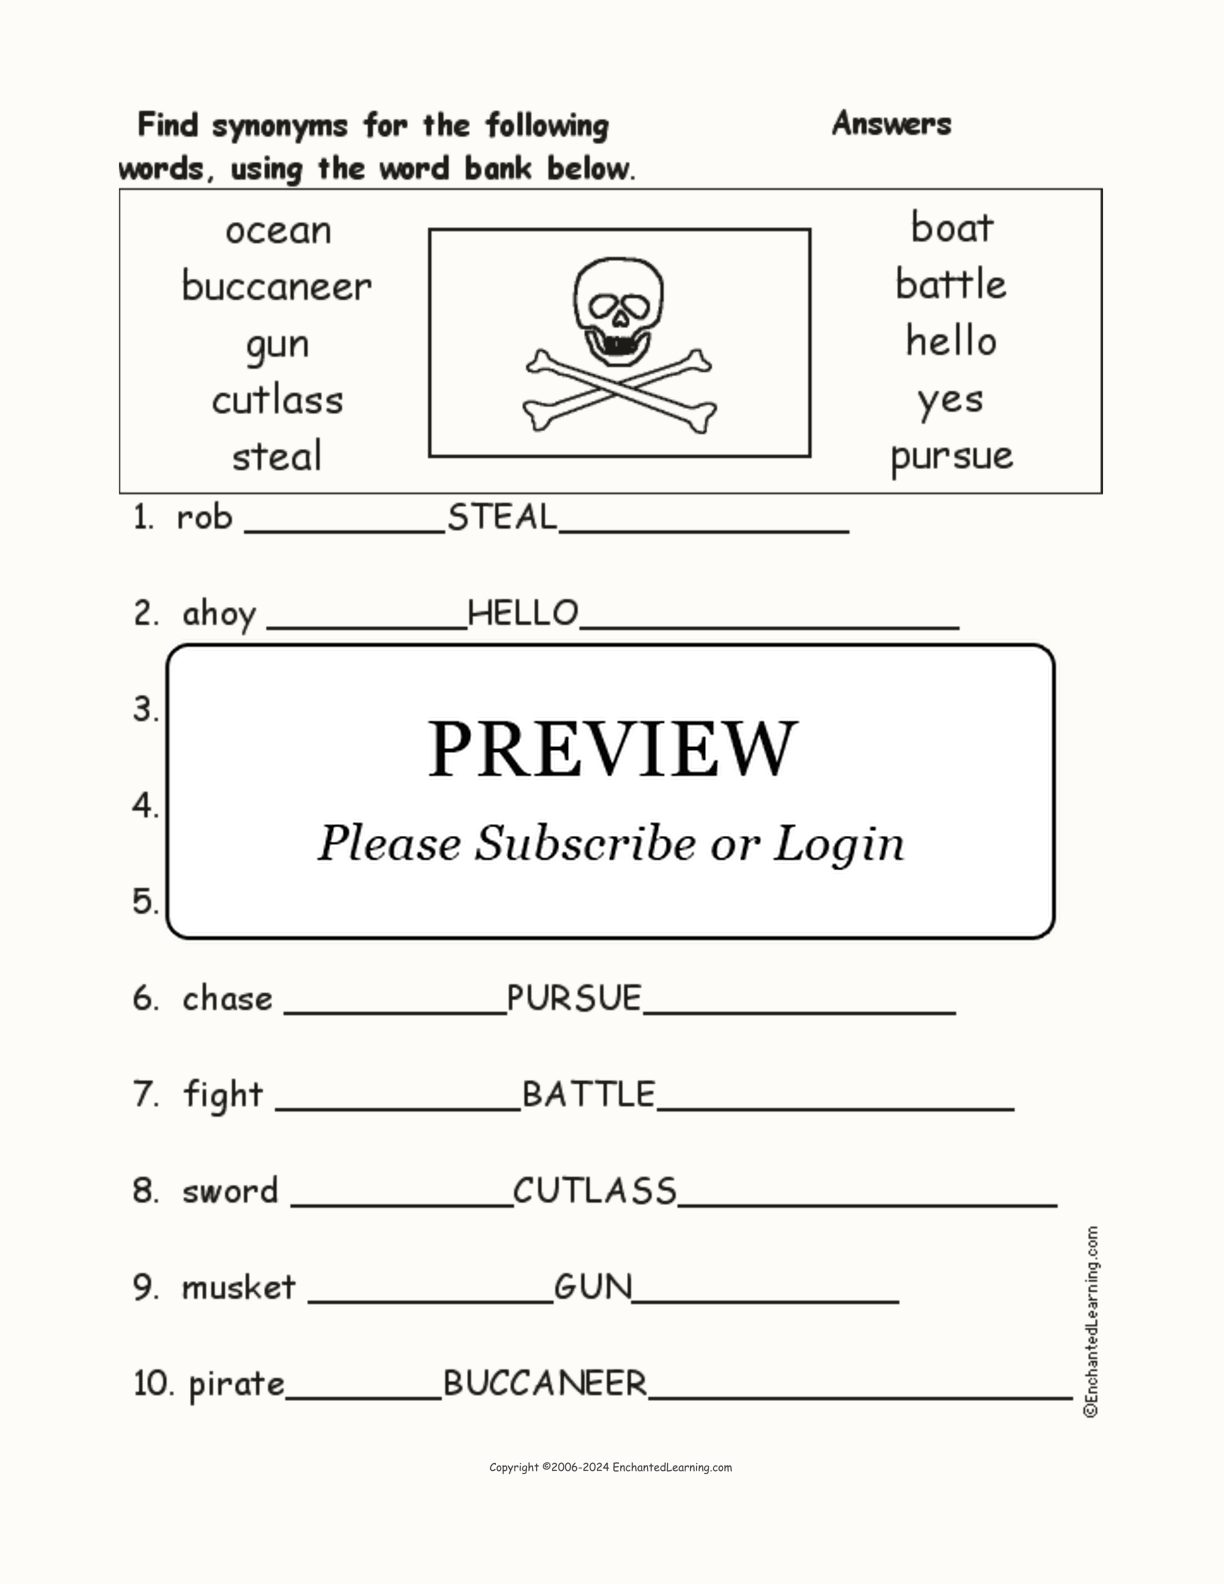 Pirate Synonyms Worksheet interactive worksheet page 2